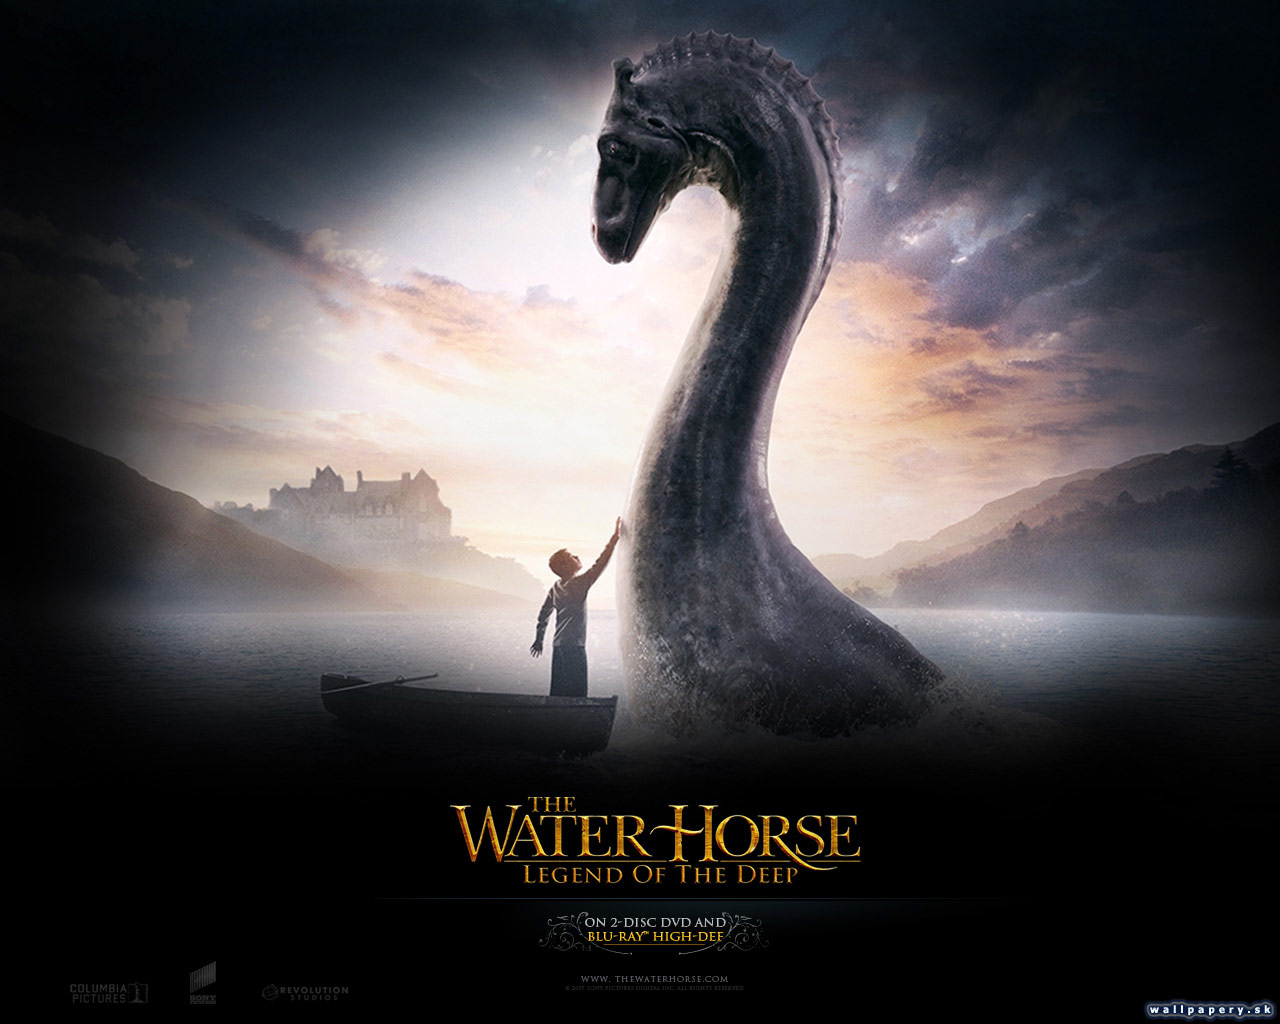 The Water Horse: Legend of The Deep - wallpaper 2